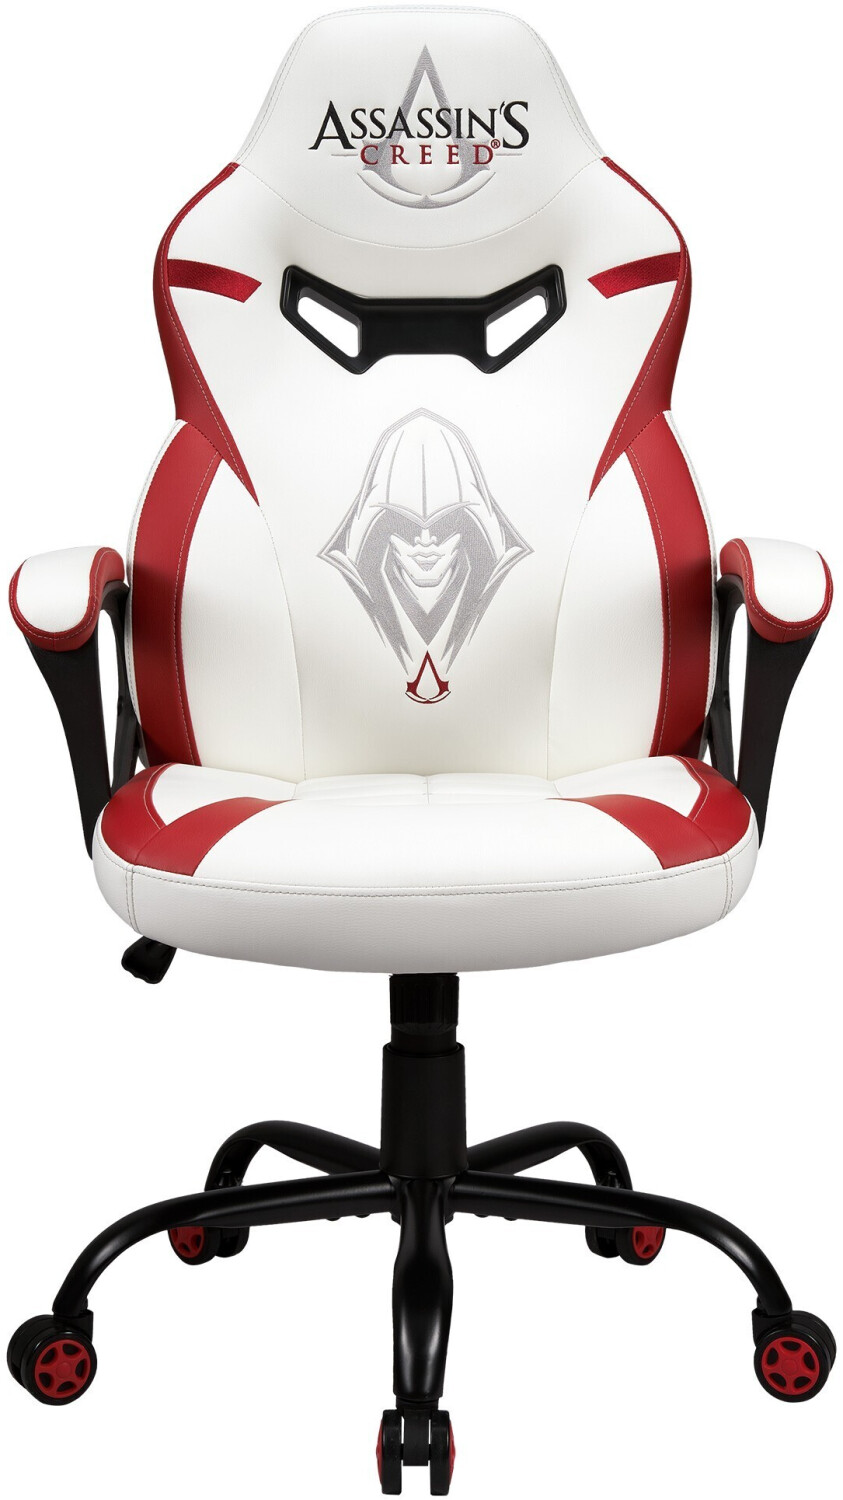 SuBsonic Junior Gaming Chair - Assassins Creed Stuhl